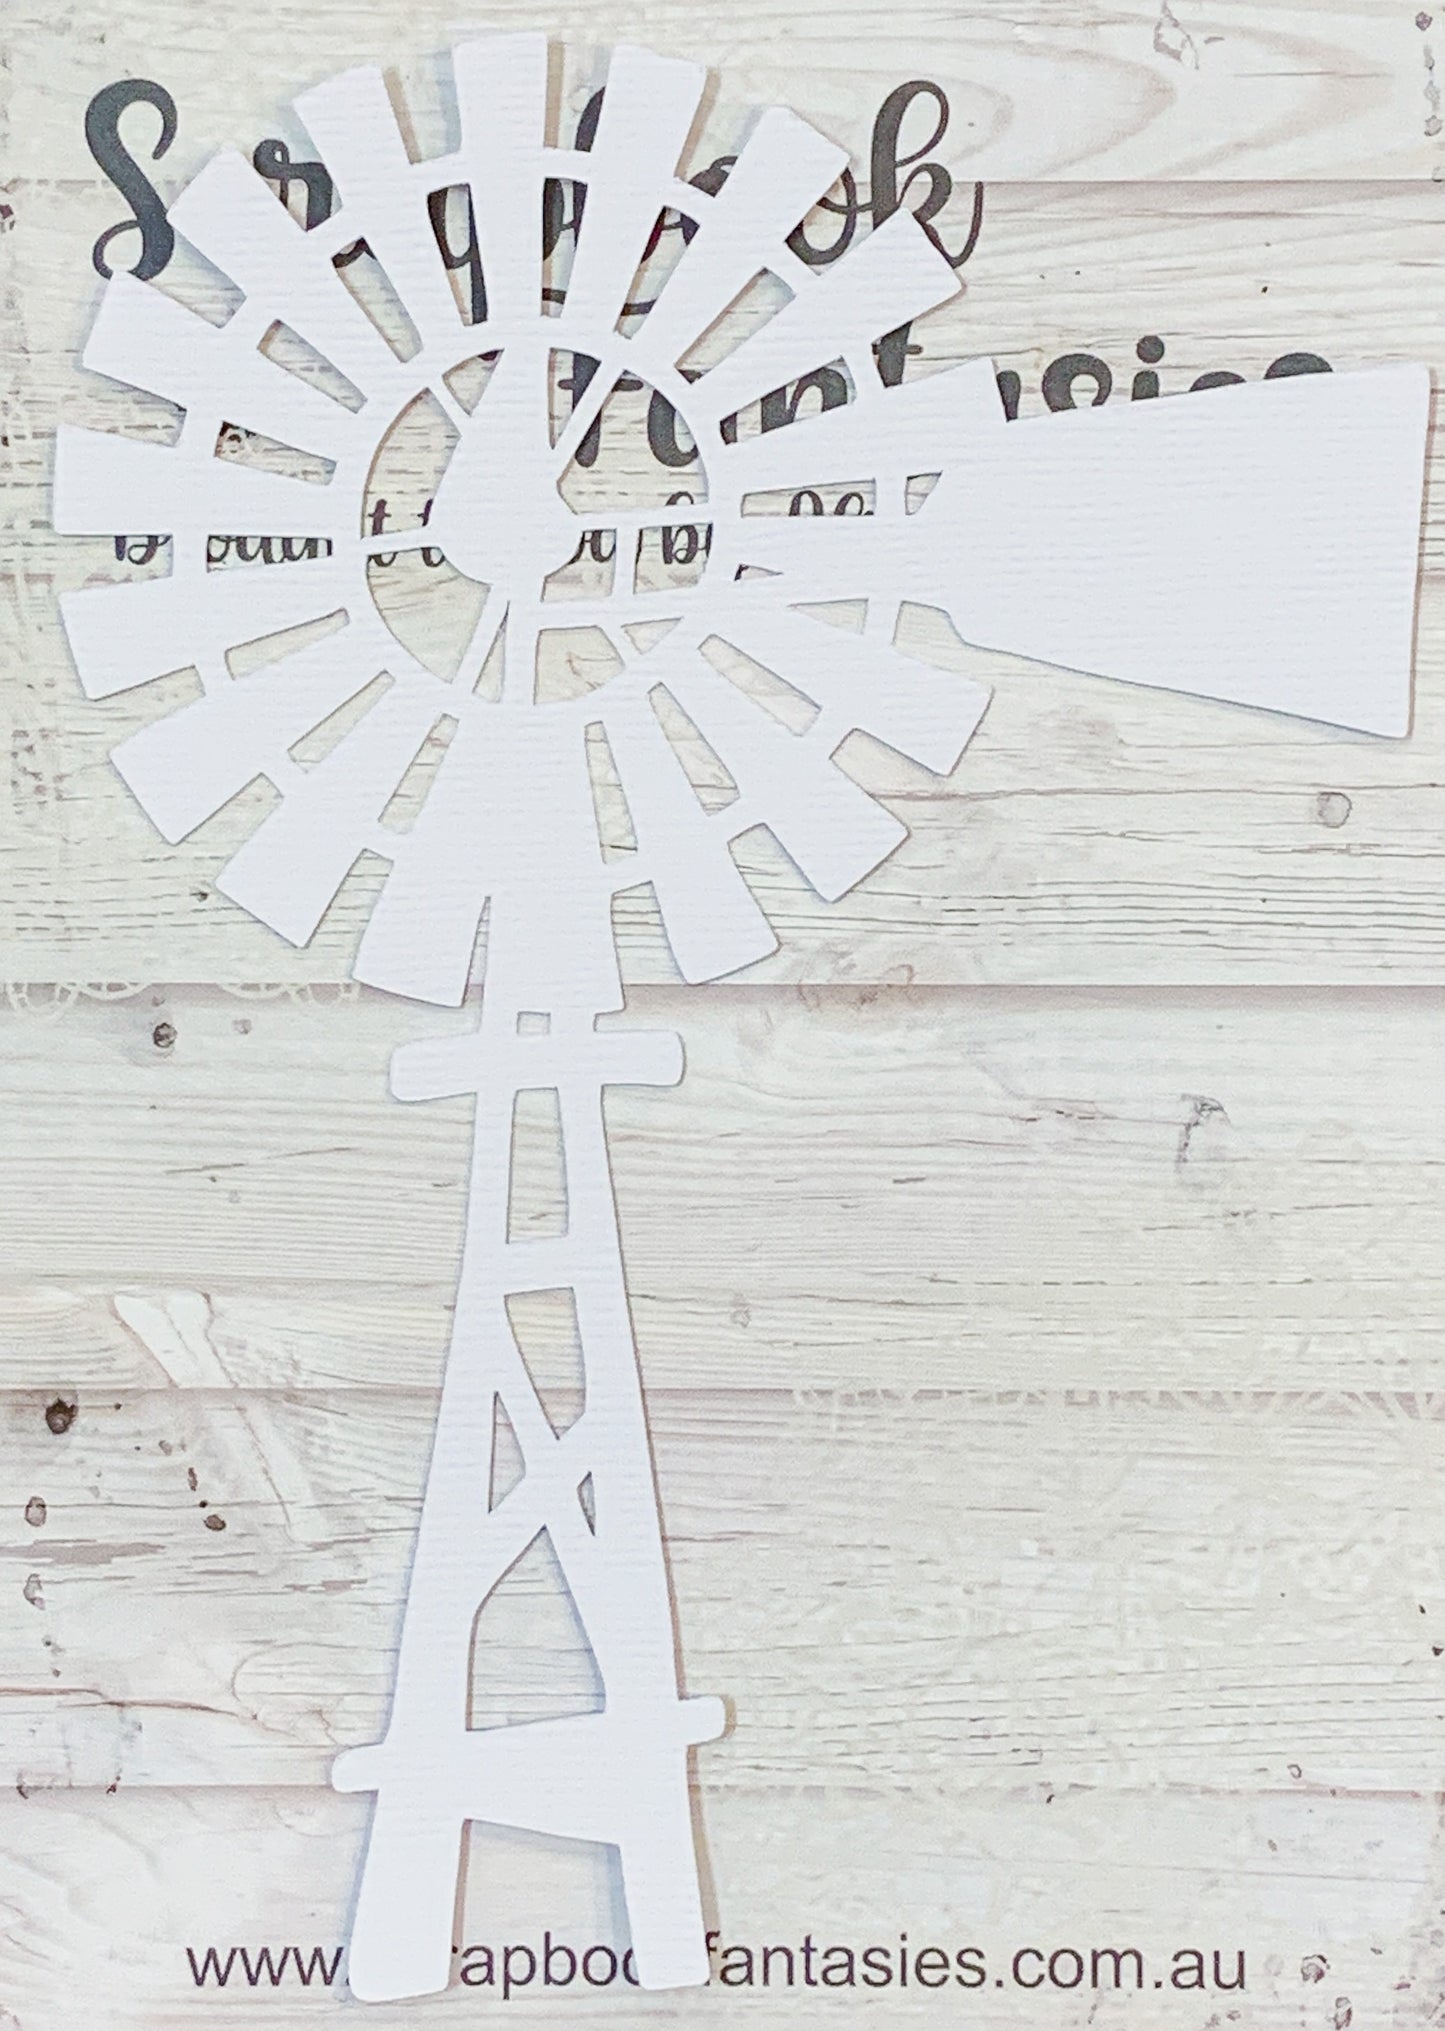 Redwood Farm Windmill 4"x6" White Linen Cardstock Picture-Cut - Designed by Alicia Redshaw Exclusively for Scrapbook Fantasies